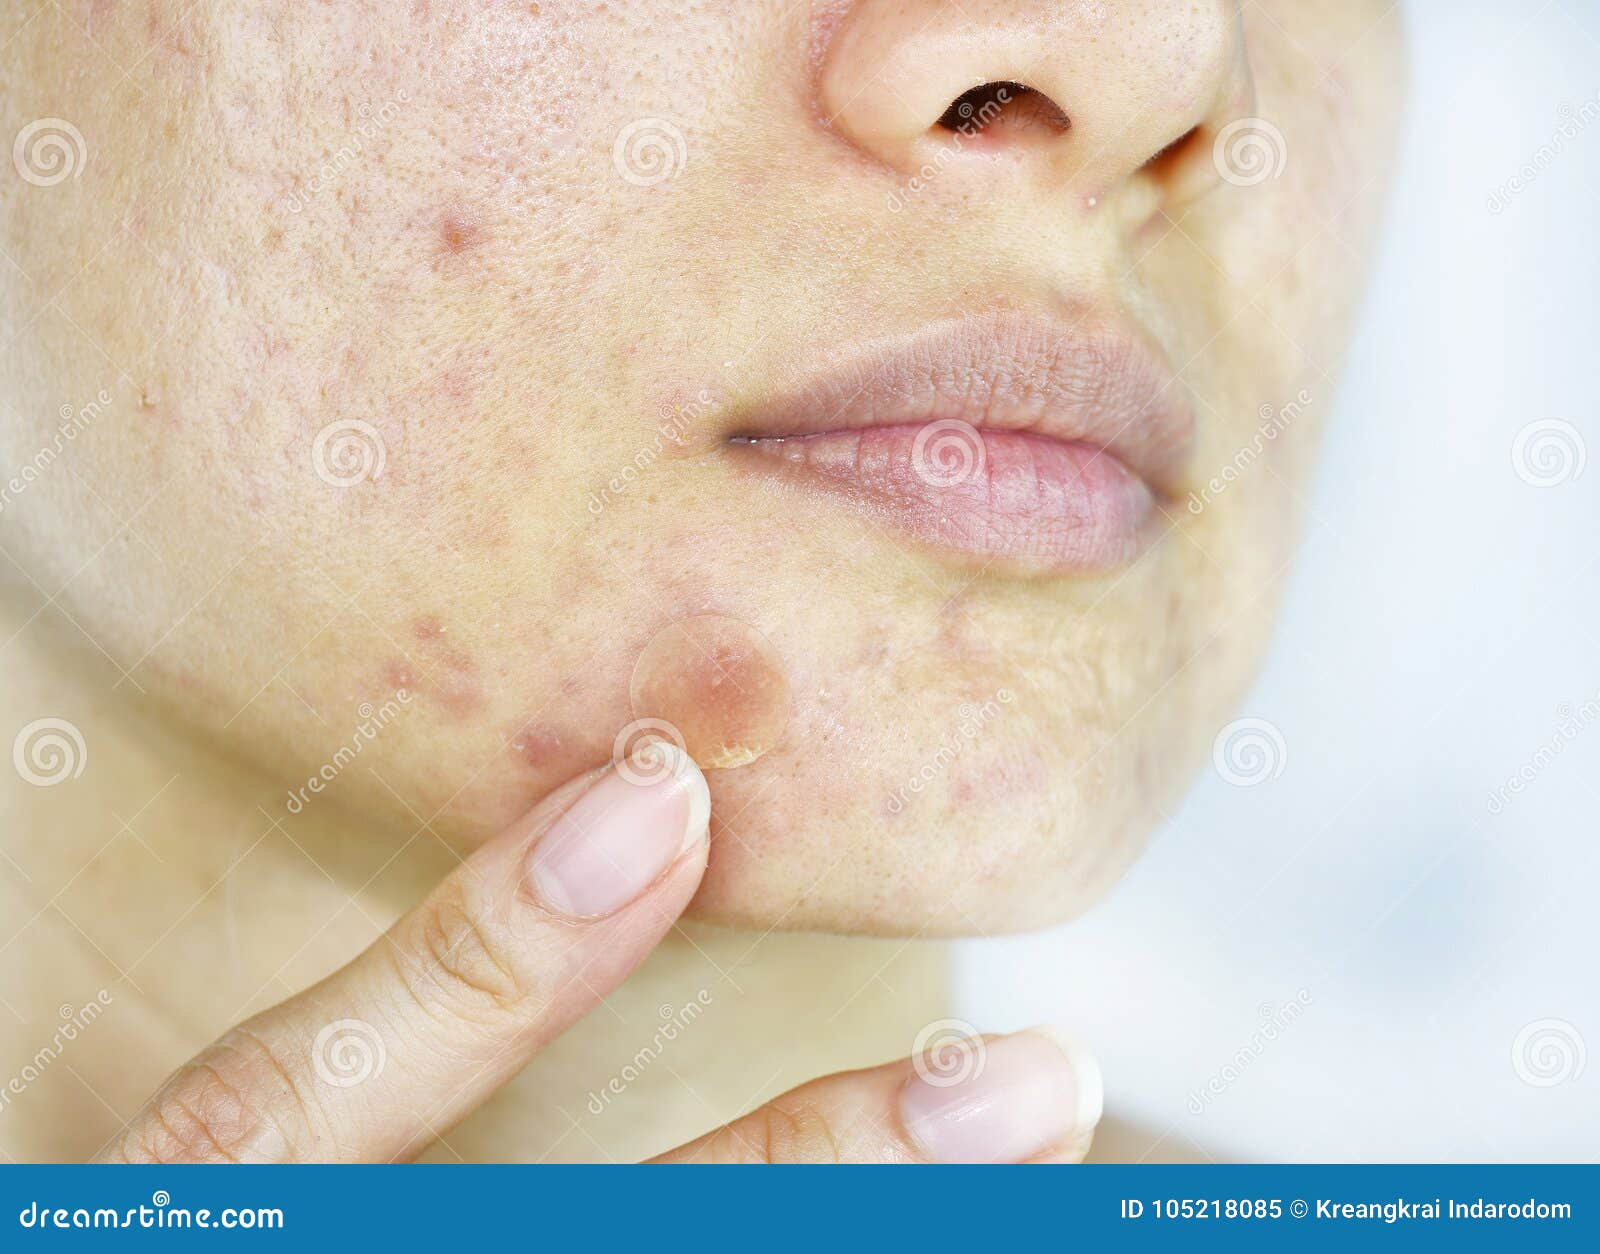 facial skin problem, close up woman face with whitehead pimples and acne patch